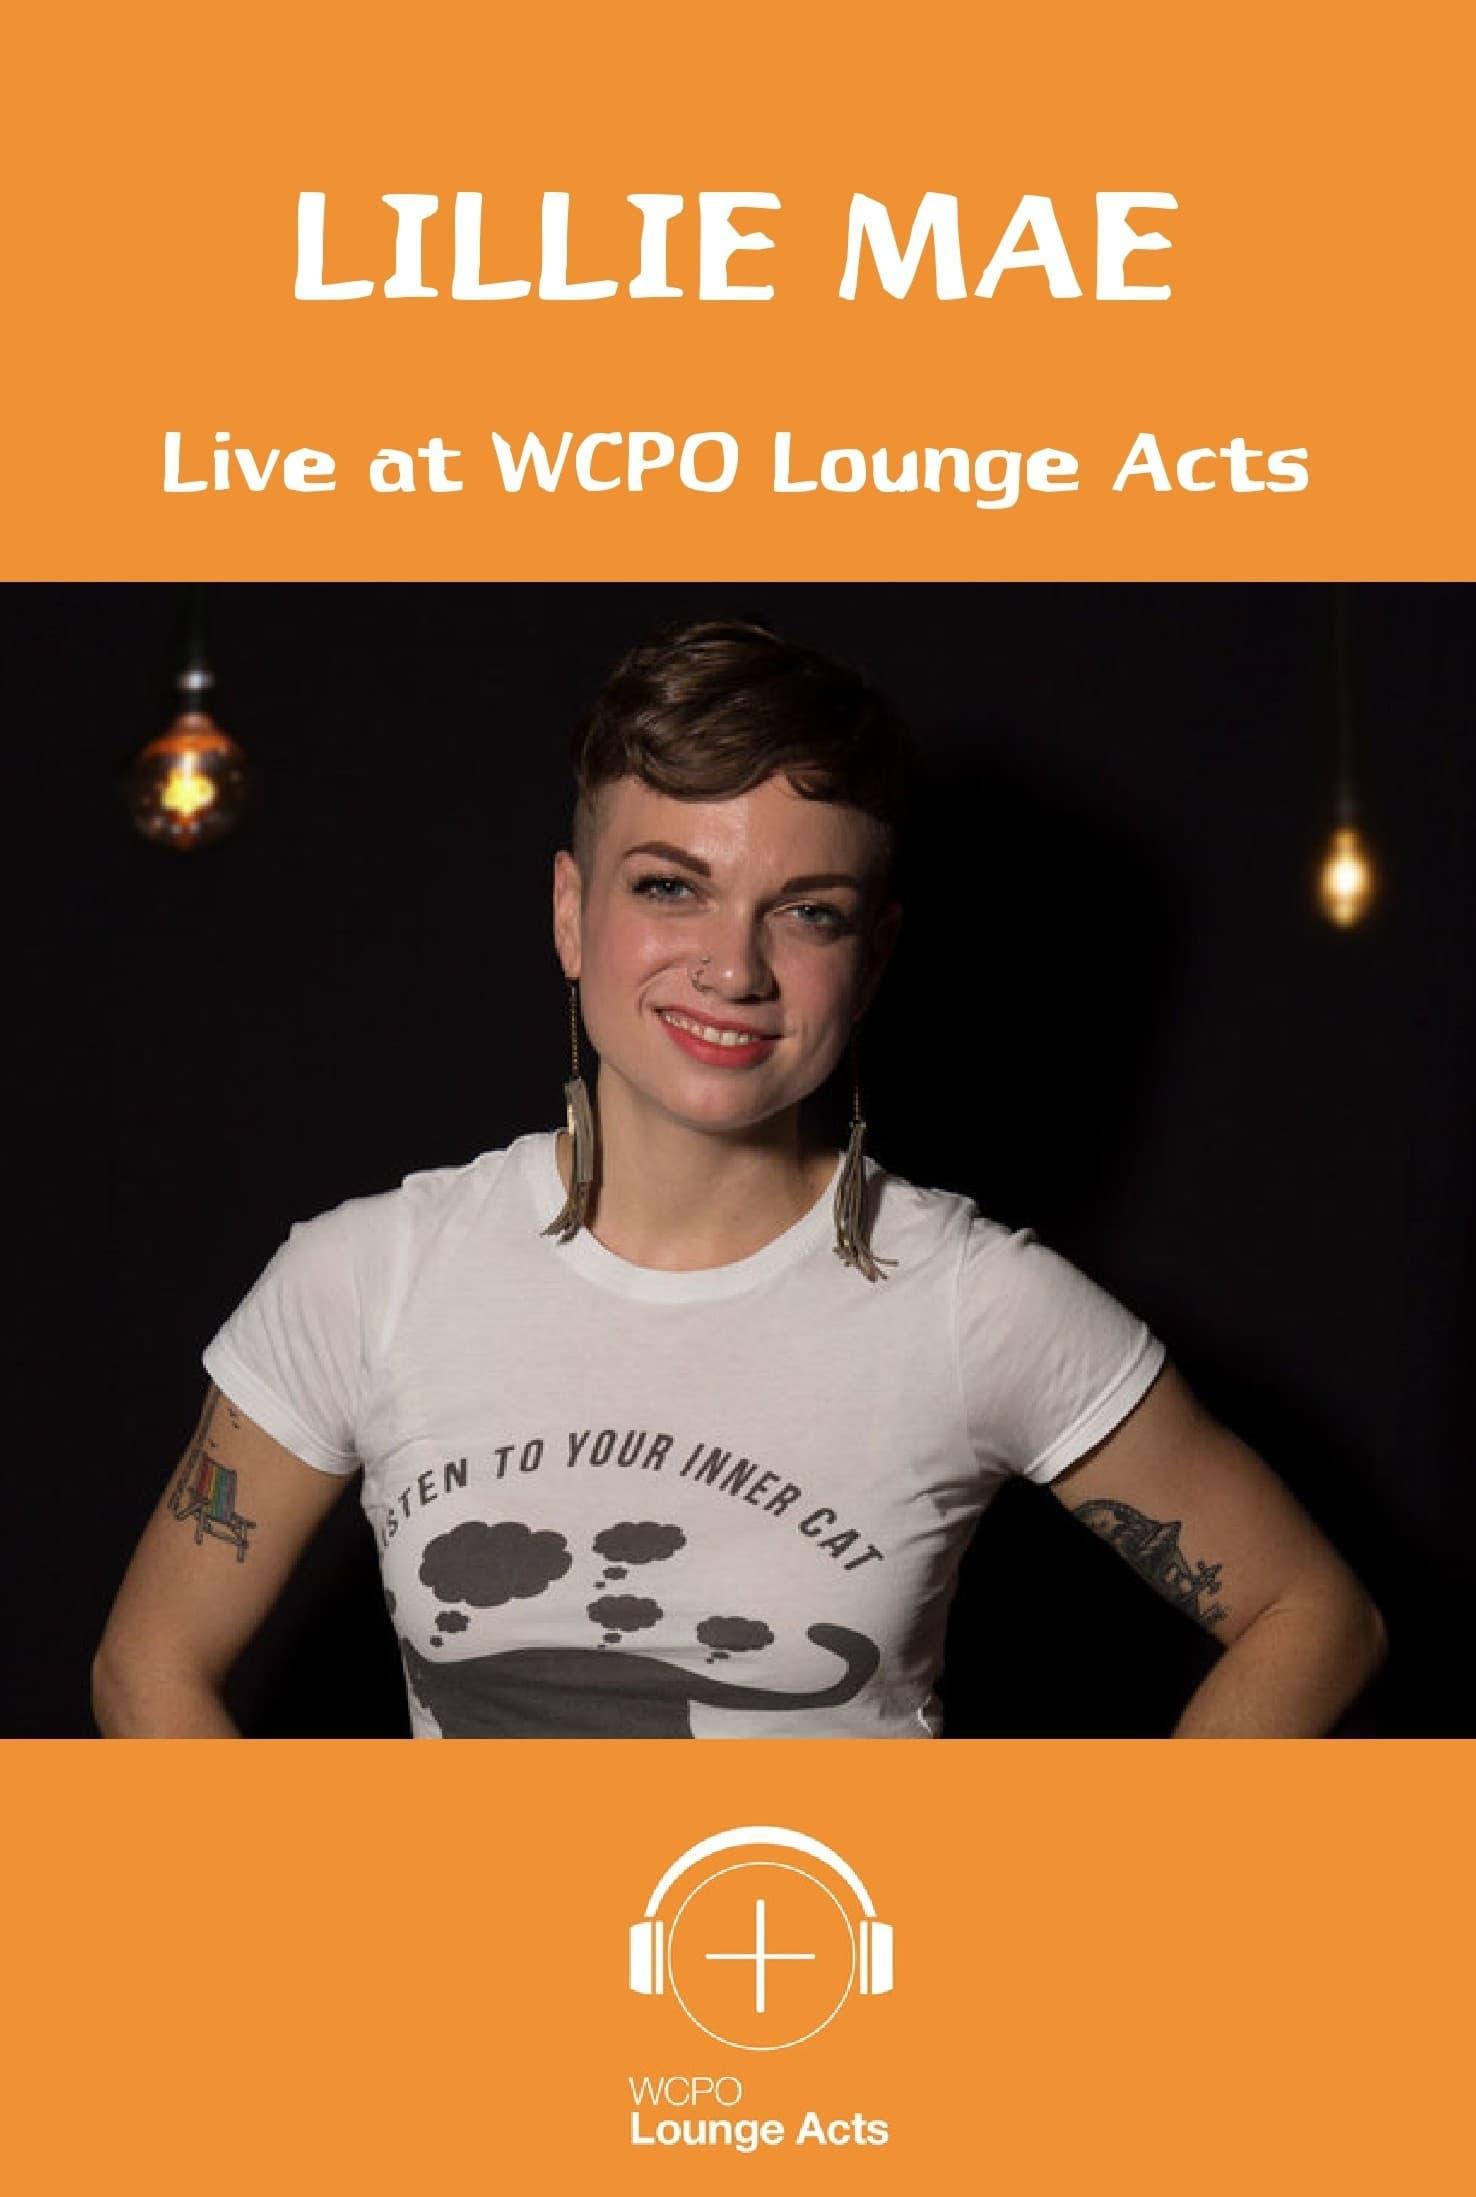 Lillie Mae Live at WCPO Lounge Acts poster